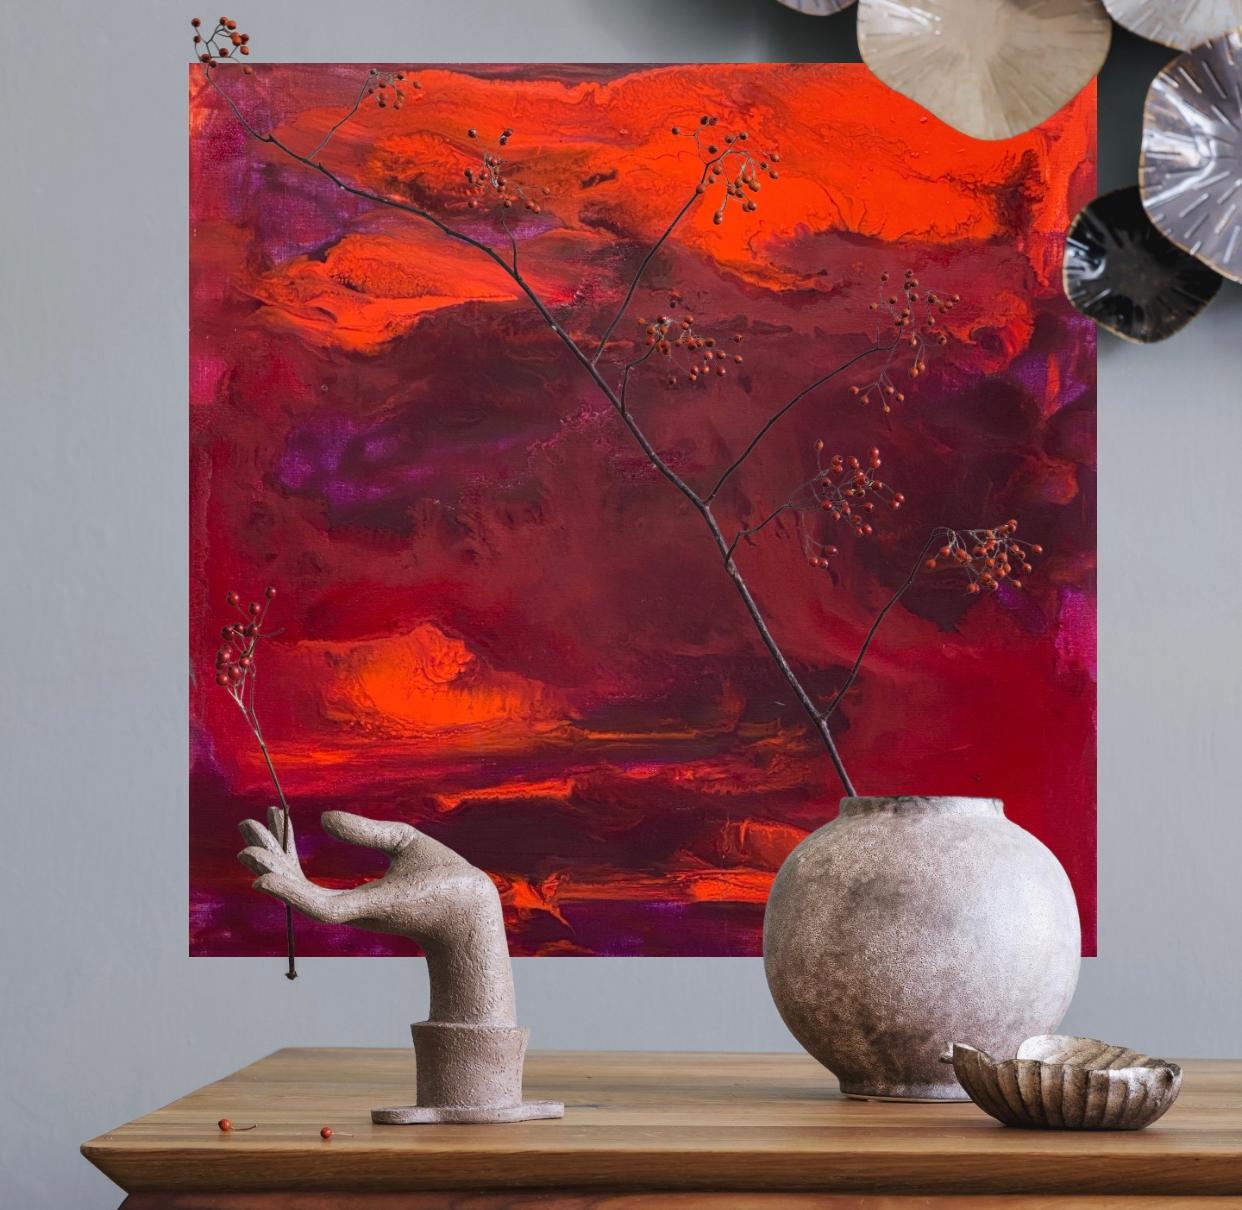 Sailor's delight, Contemporary painting with bold reds, oranges and violets 8